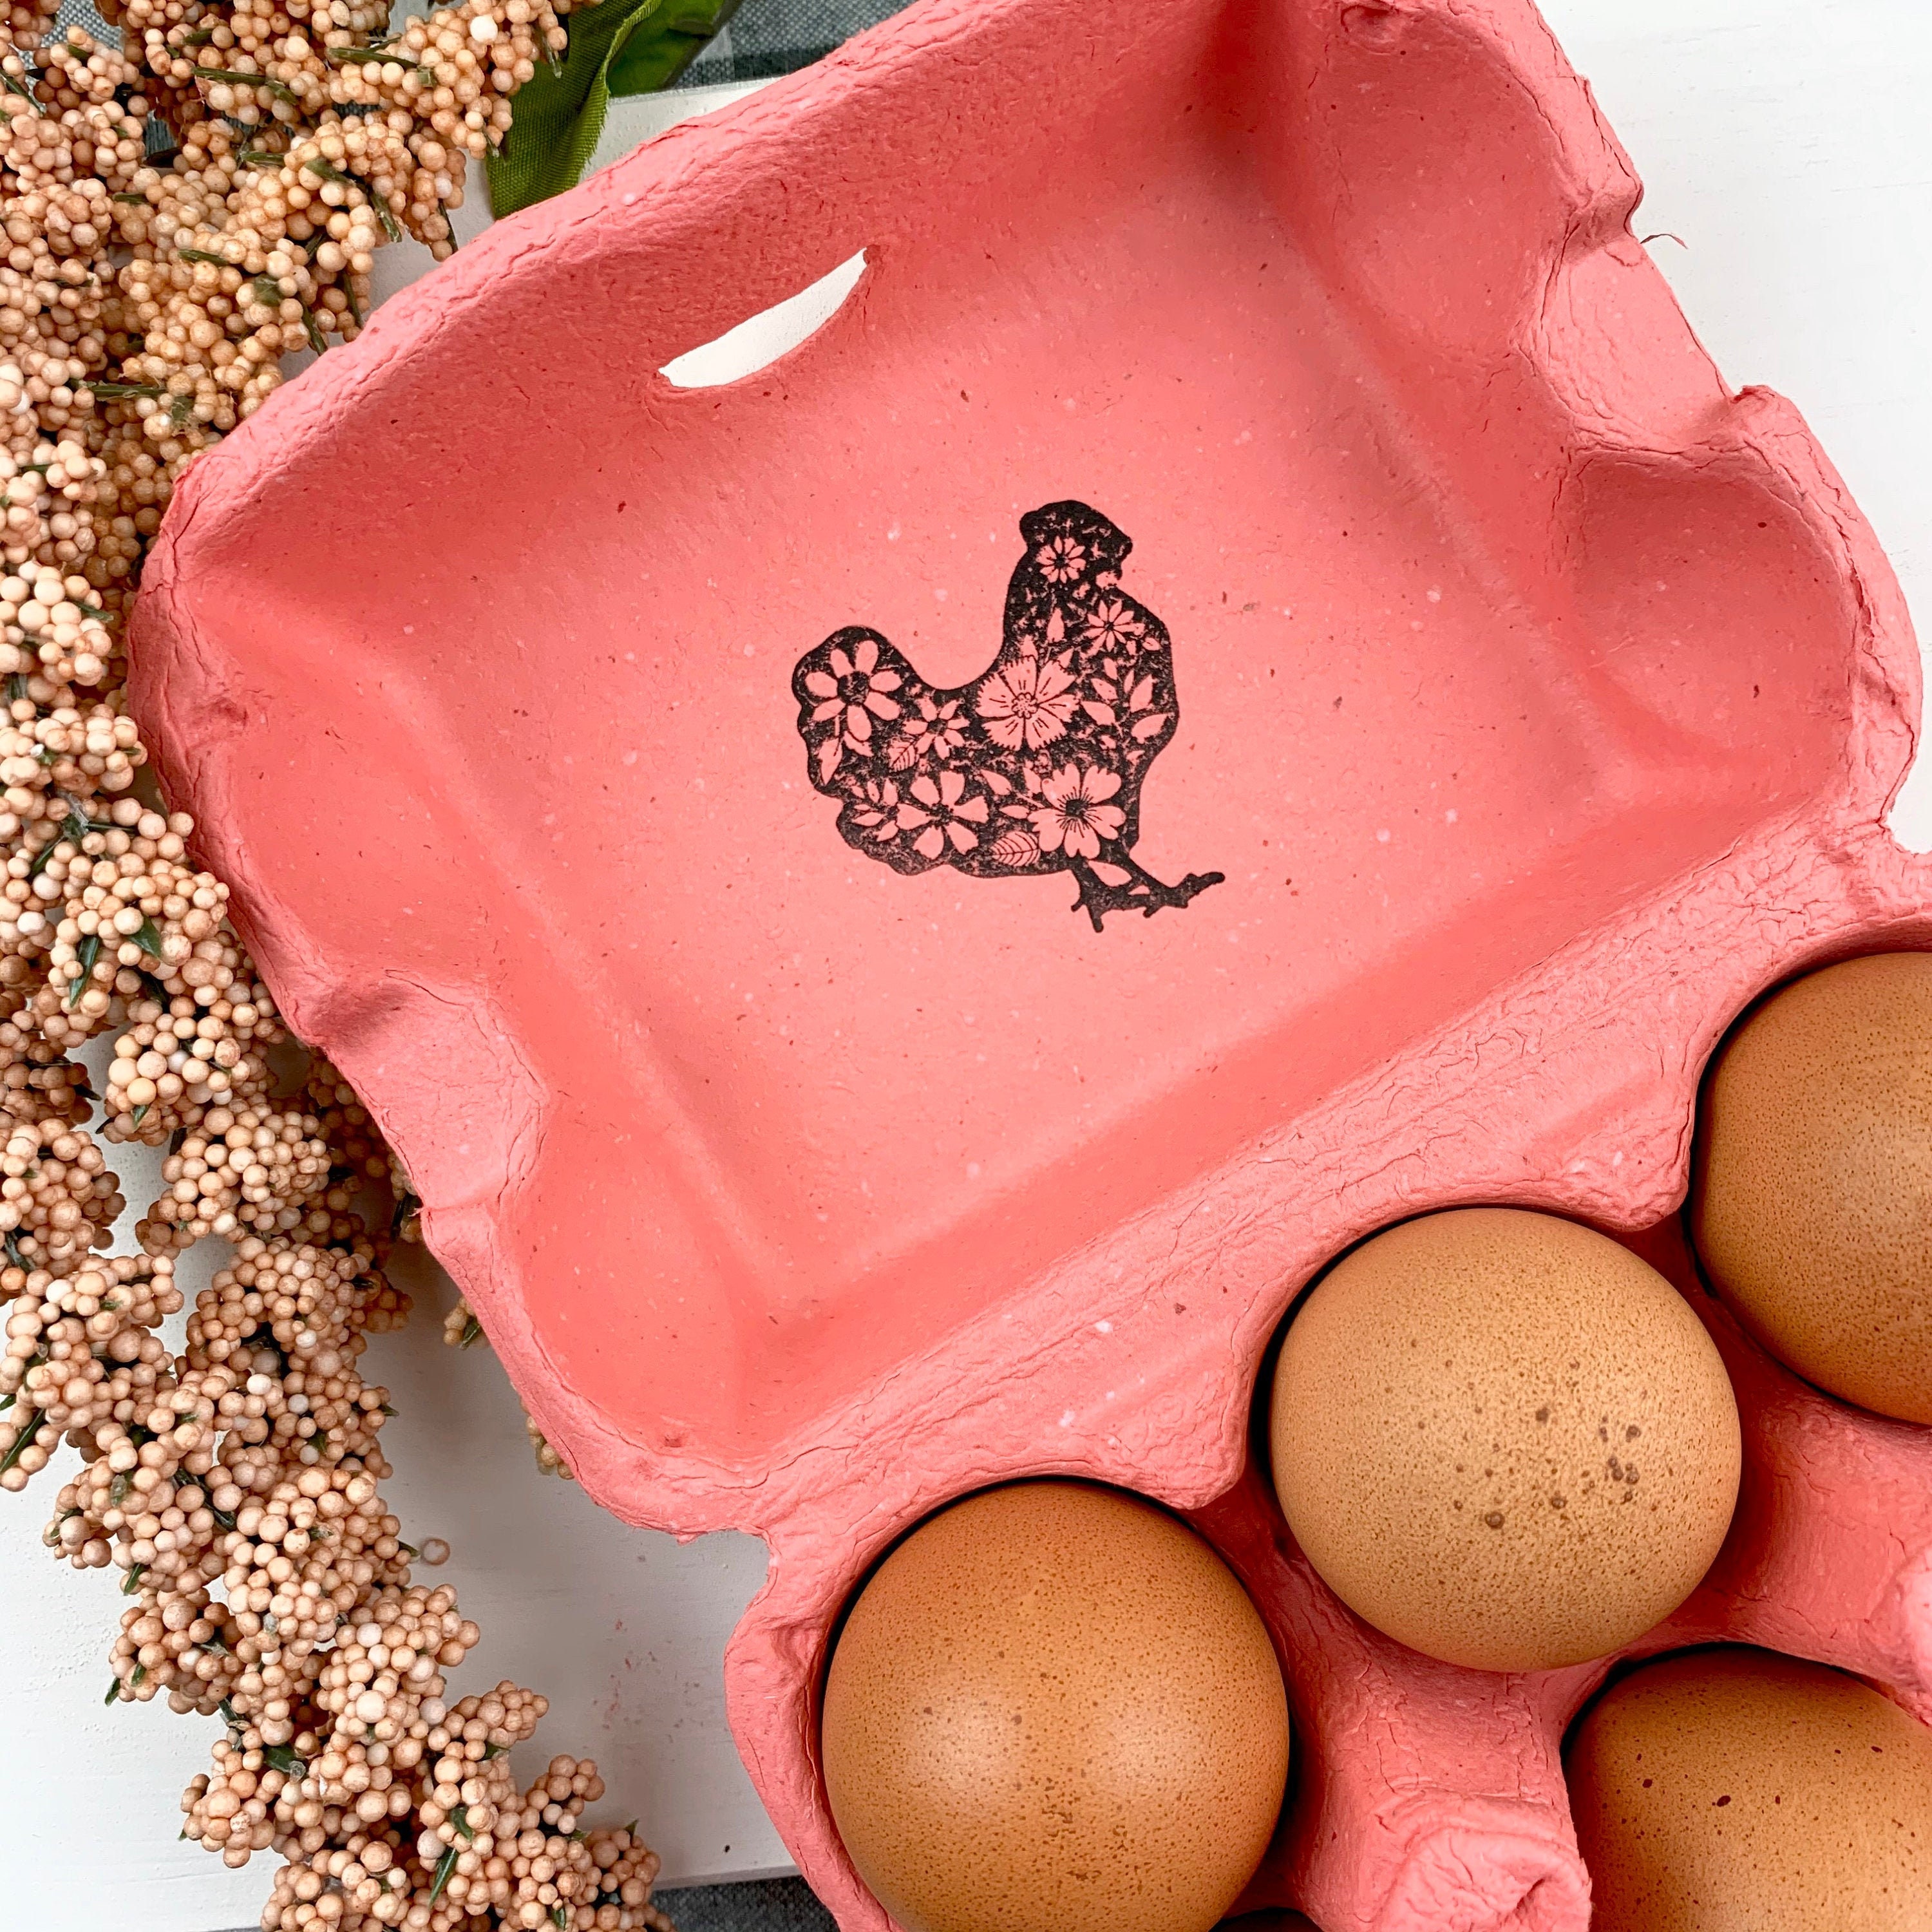 Egg Stamper for Chicken Eggs, Egg Stamps for Fresh Eggs, Farm Fresh Egg  Stamp, Egg Stamps for Fresh Eggs Personalized, Custom Chicken Mini Egg Stamp  Complete Rubber Stamp, Farmhouse Decor Gift Pattern